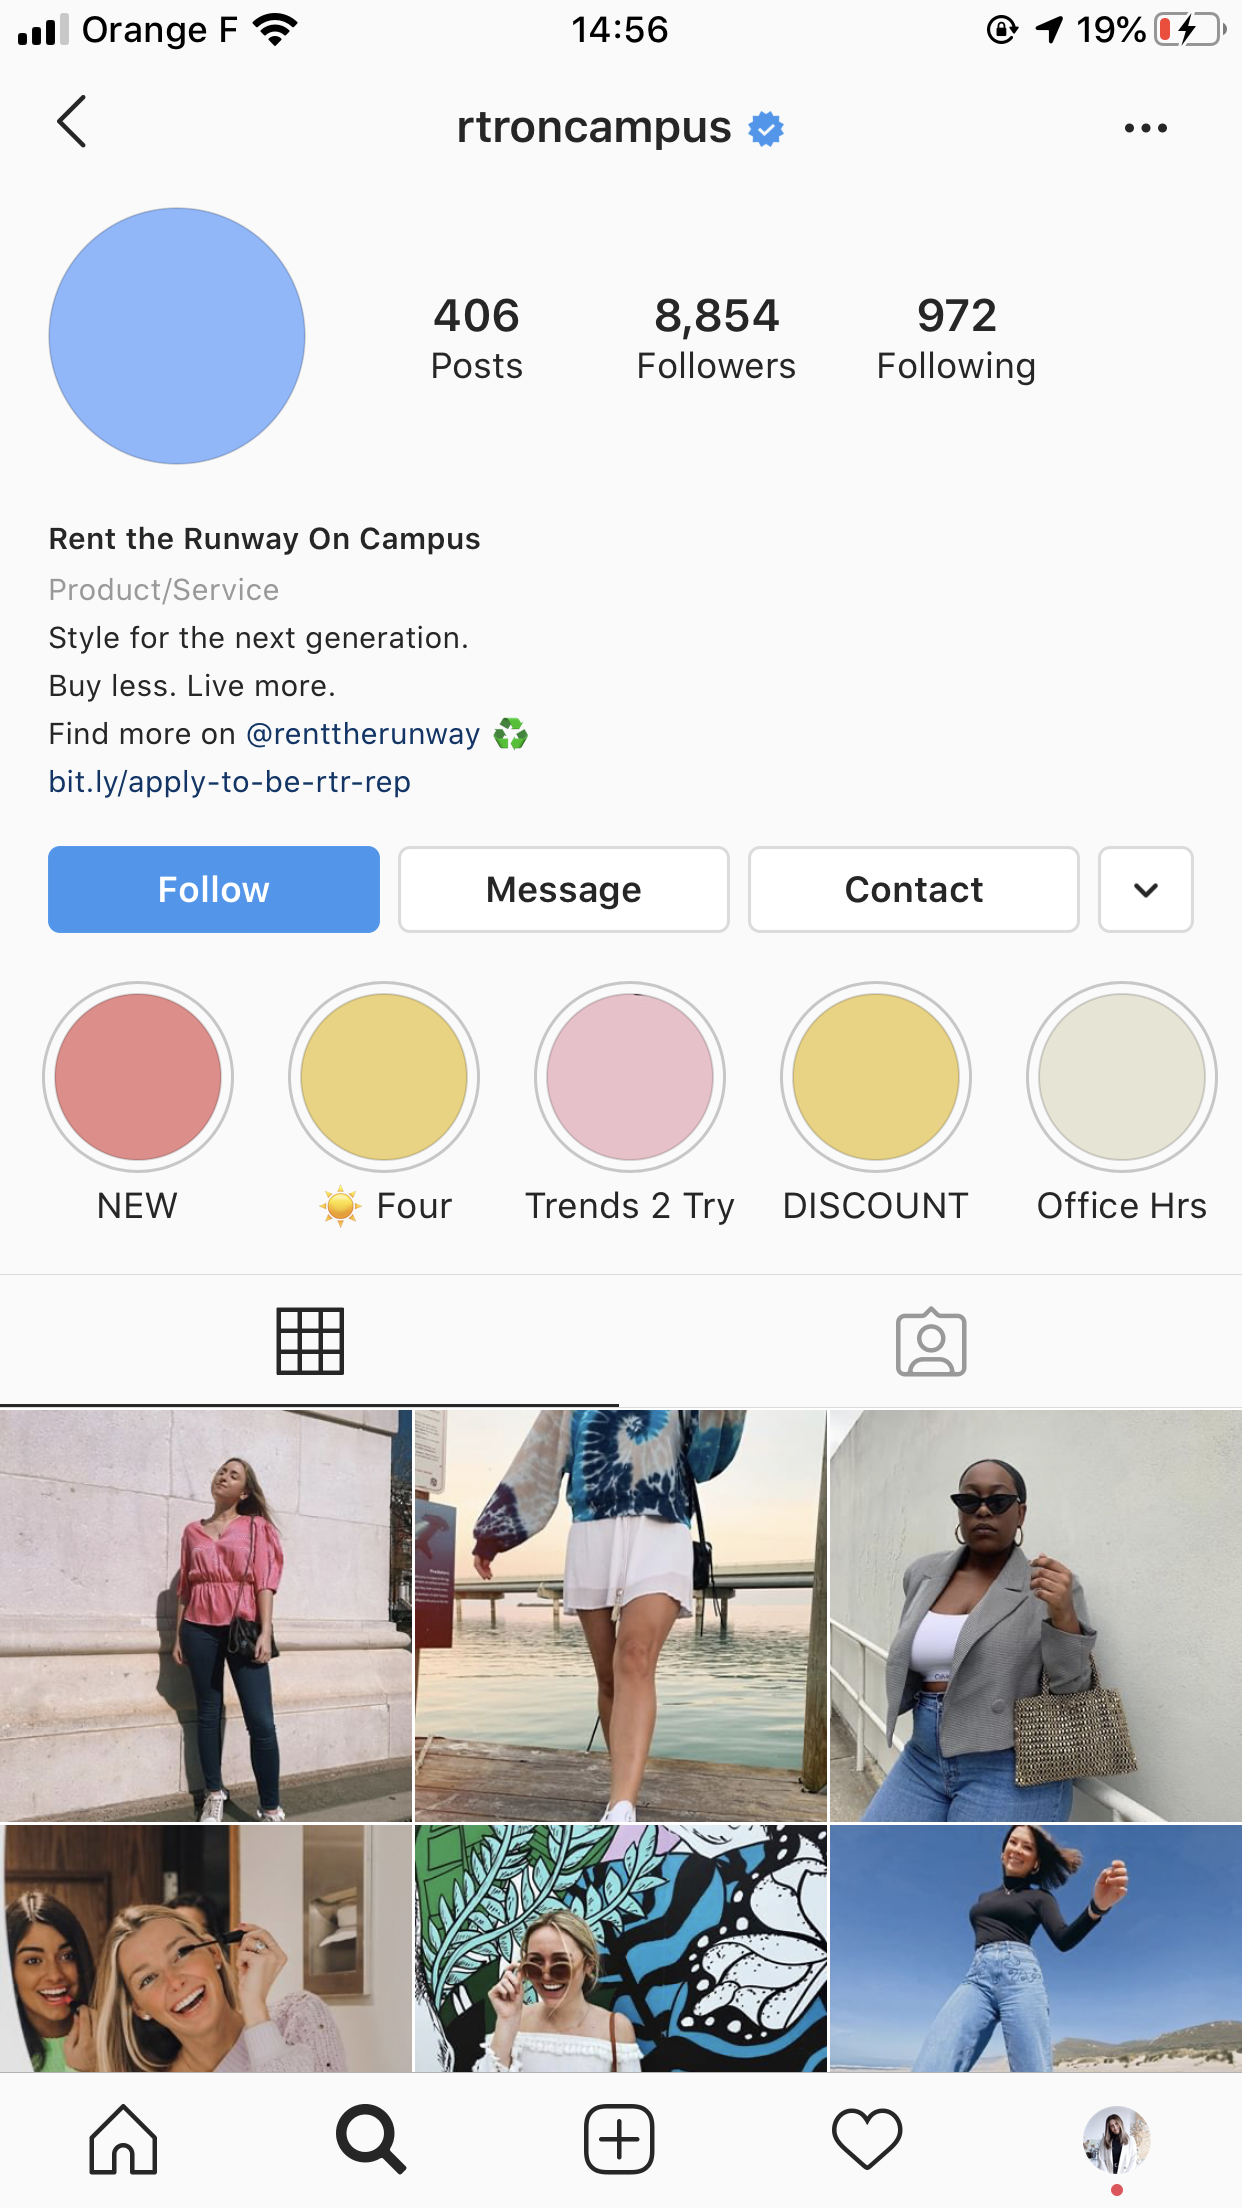 Rent the Runway does well with gathering user-generated content for their feed and posting it frequently.